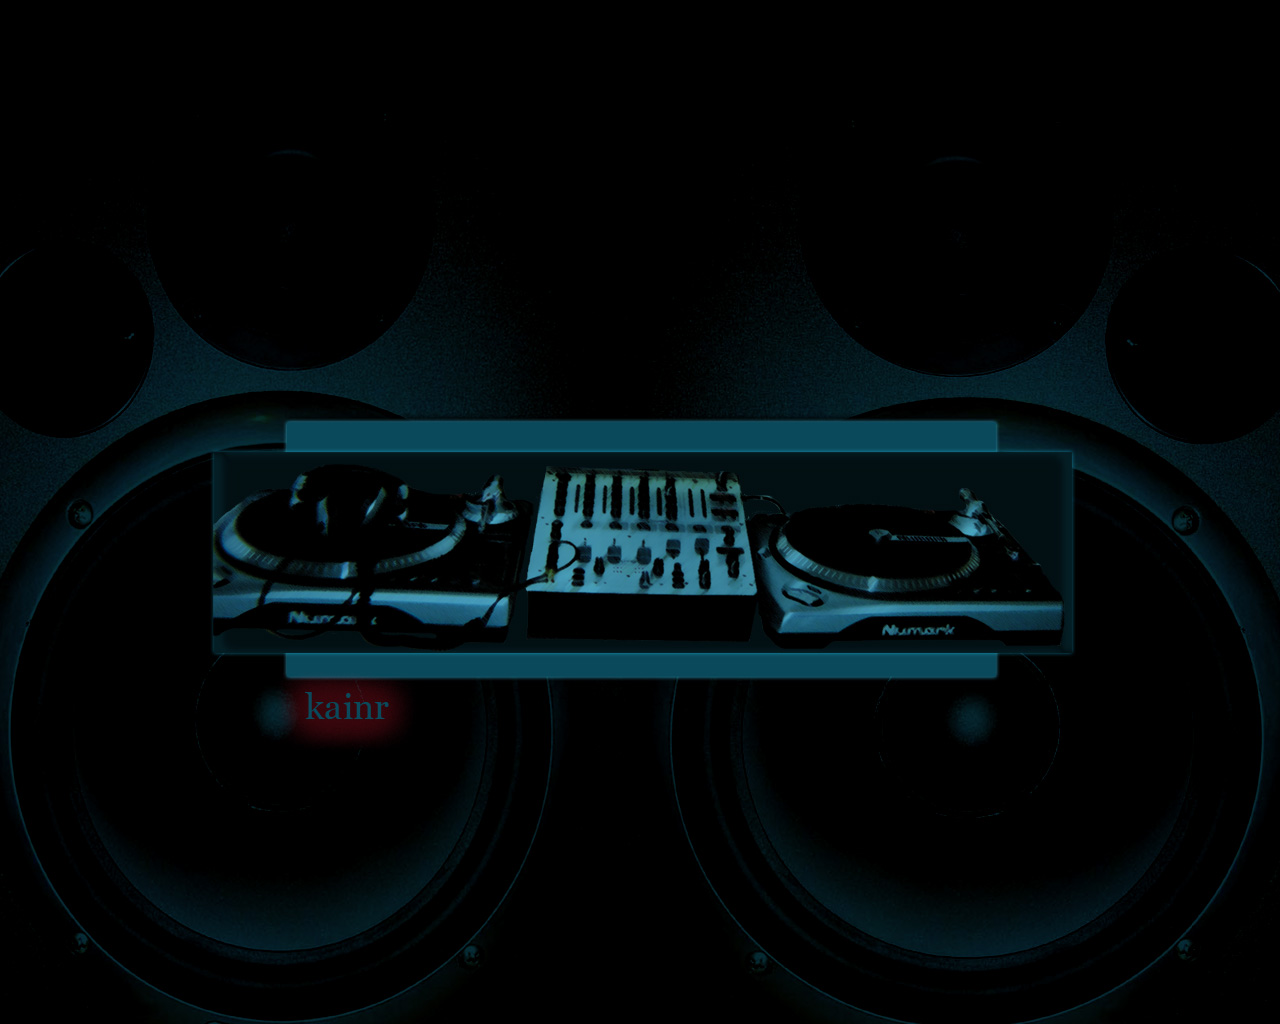 My Turntable Wallpaper By Kainr Customization Photo